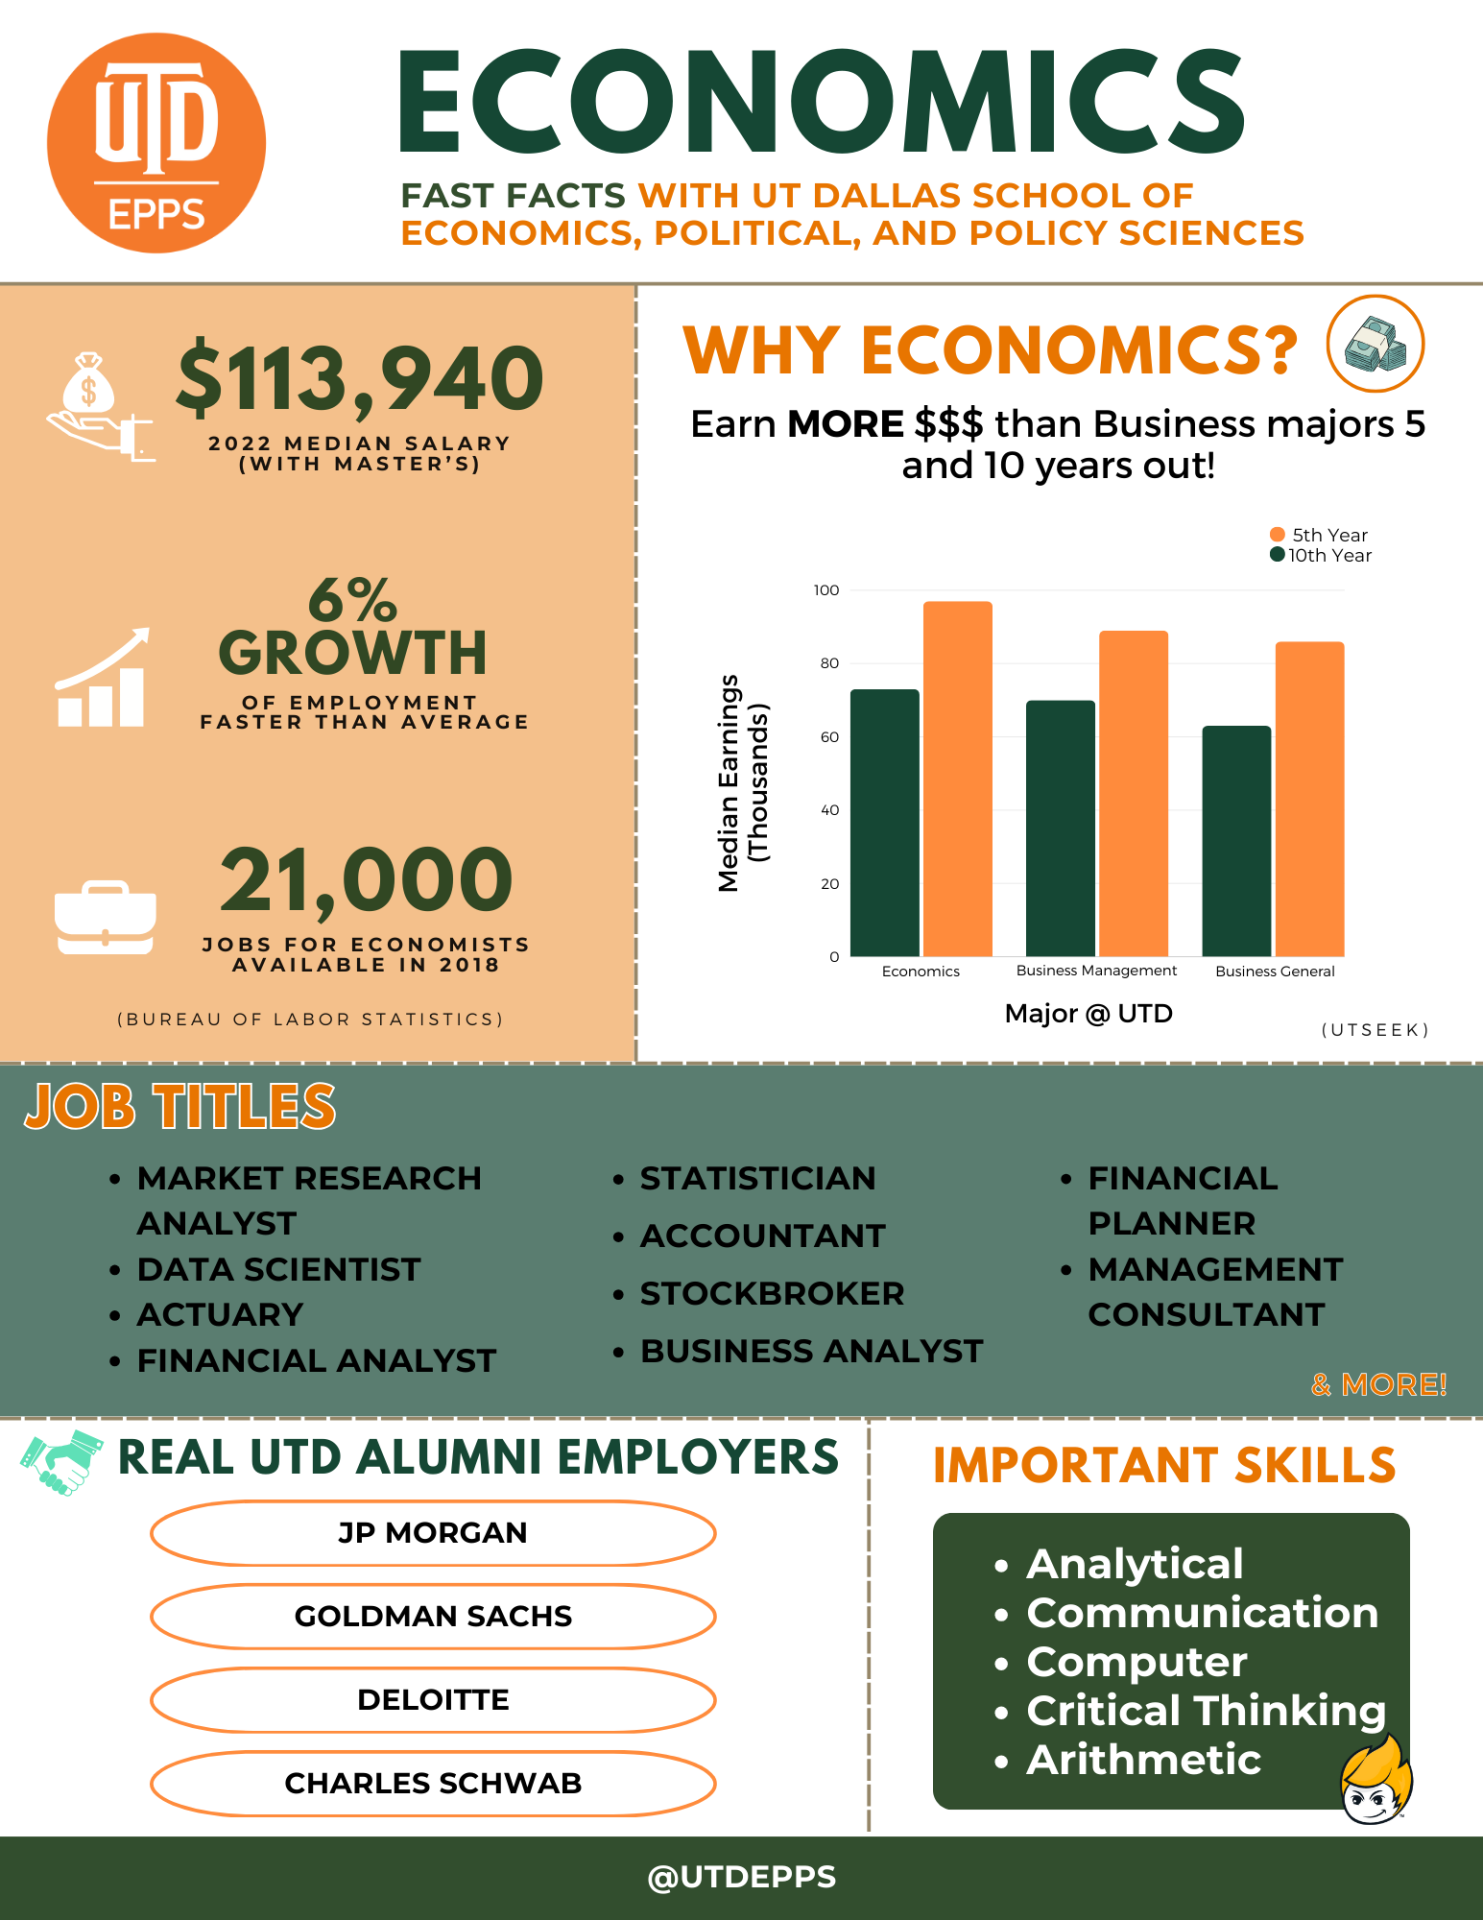 Economics
Fast Facts with Ut dallas school of economics, political, and policy sciences. 

3,940 is the 2022 median salary 
(with master’s). 6% Growth
of employment which is faster than average. 21,000 jobs for economists available in 2018. Data is from Bureau of Labor Statistics.
WHY ECONOMICS?
Earn MORE money than Business majors 5 and 10 years out! Graph shows that UTD Economics Majors earn more than their Business major counterparts. Data is from UTSEEK.


Job titles include:
STATISTICIAN
ACCOUNTANT
STOCKBROKER
BUSINESS ANALYST
FINANCIAL PLANNER
MANAGEMENT CONSULTANT
MARKET RESEARCH ANALYST
DATA SCIENTIST
ACTUARY
FINANCIAL ANALYST

Important skills to have include:
Analytical
Communication
Computer
Critical Thinking
Arithmetic
& MORE!

Real UTD alumni employers include:
JP MORGAN
GOLDMAN SACHS
DELOITTE
CHARLES SCHWAB

@UTDEPPS